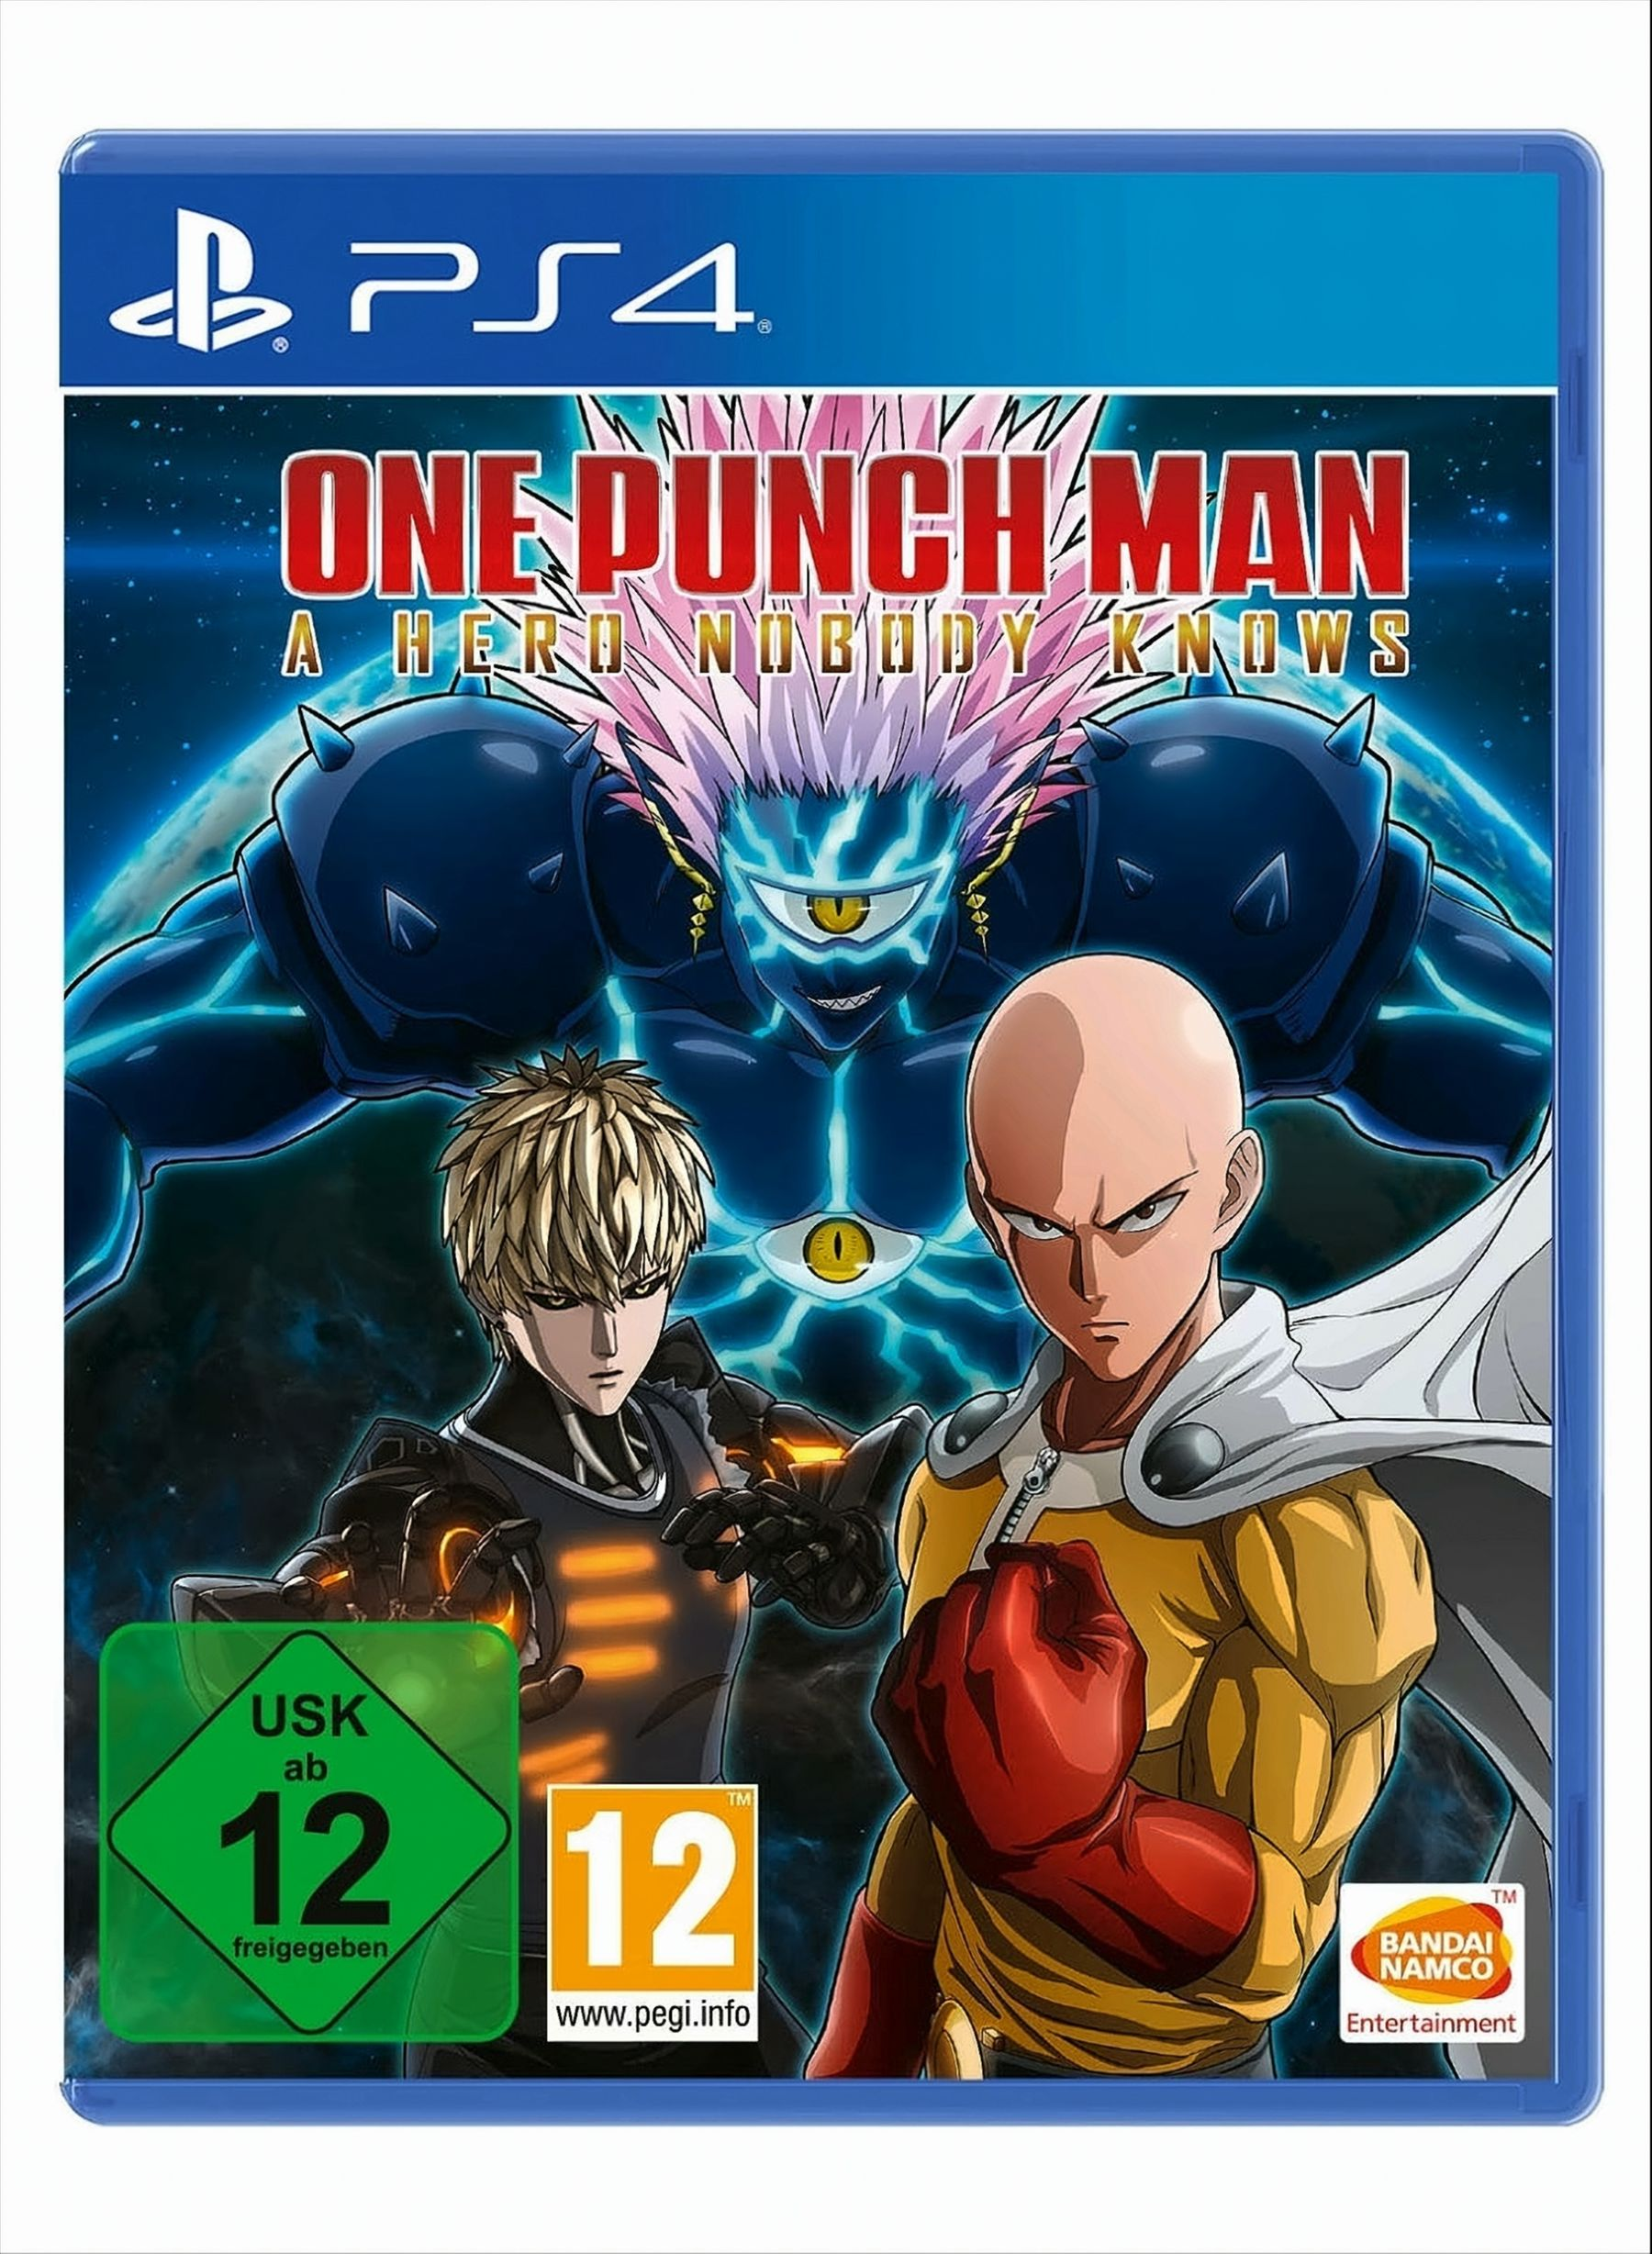 One Punch Knows - Hero Nobody 4] Man: [PlayStation